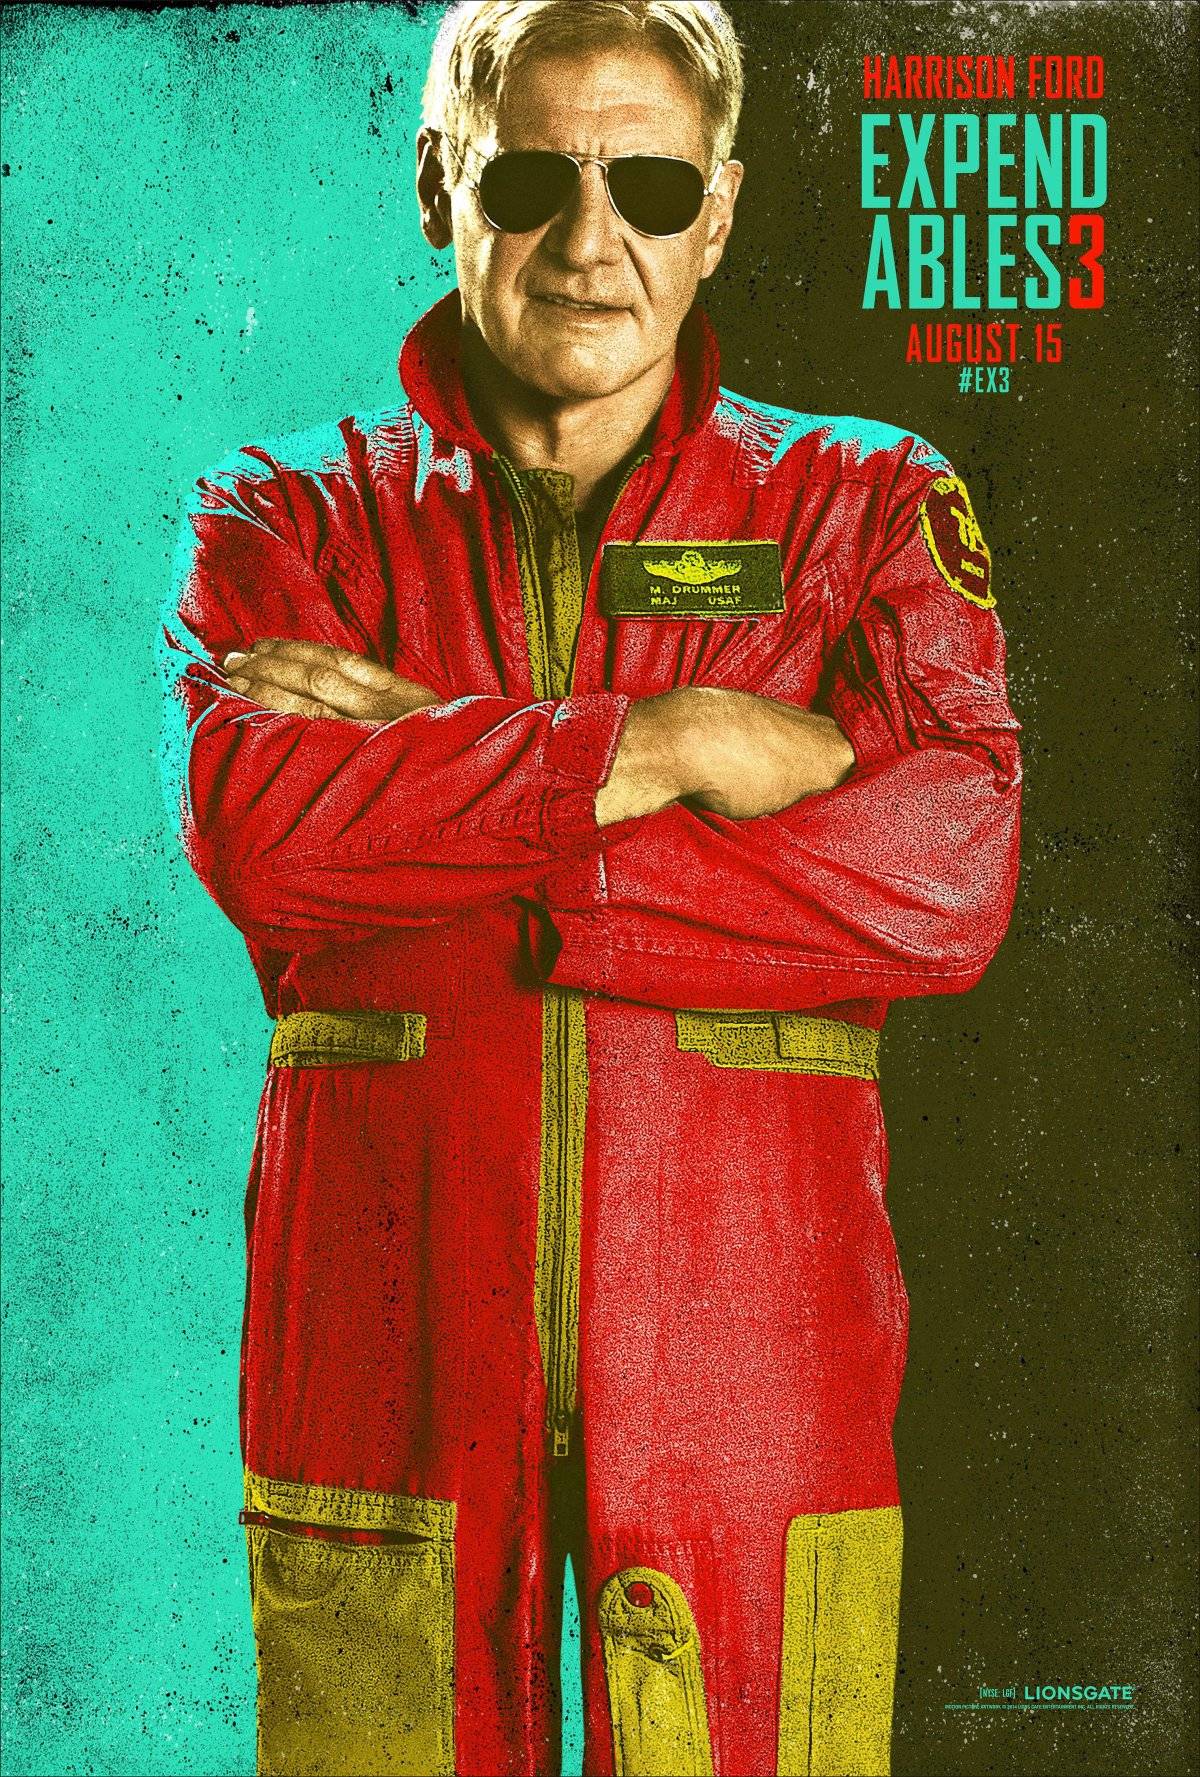 A4 Poster Print The Expendables 3 Harrison Ford **DISCOUNTED OFFERS**  A3